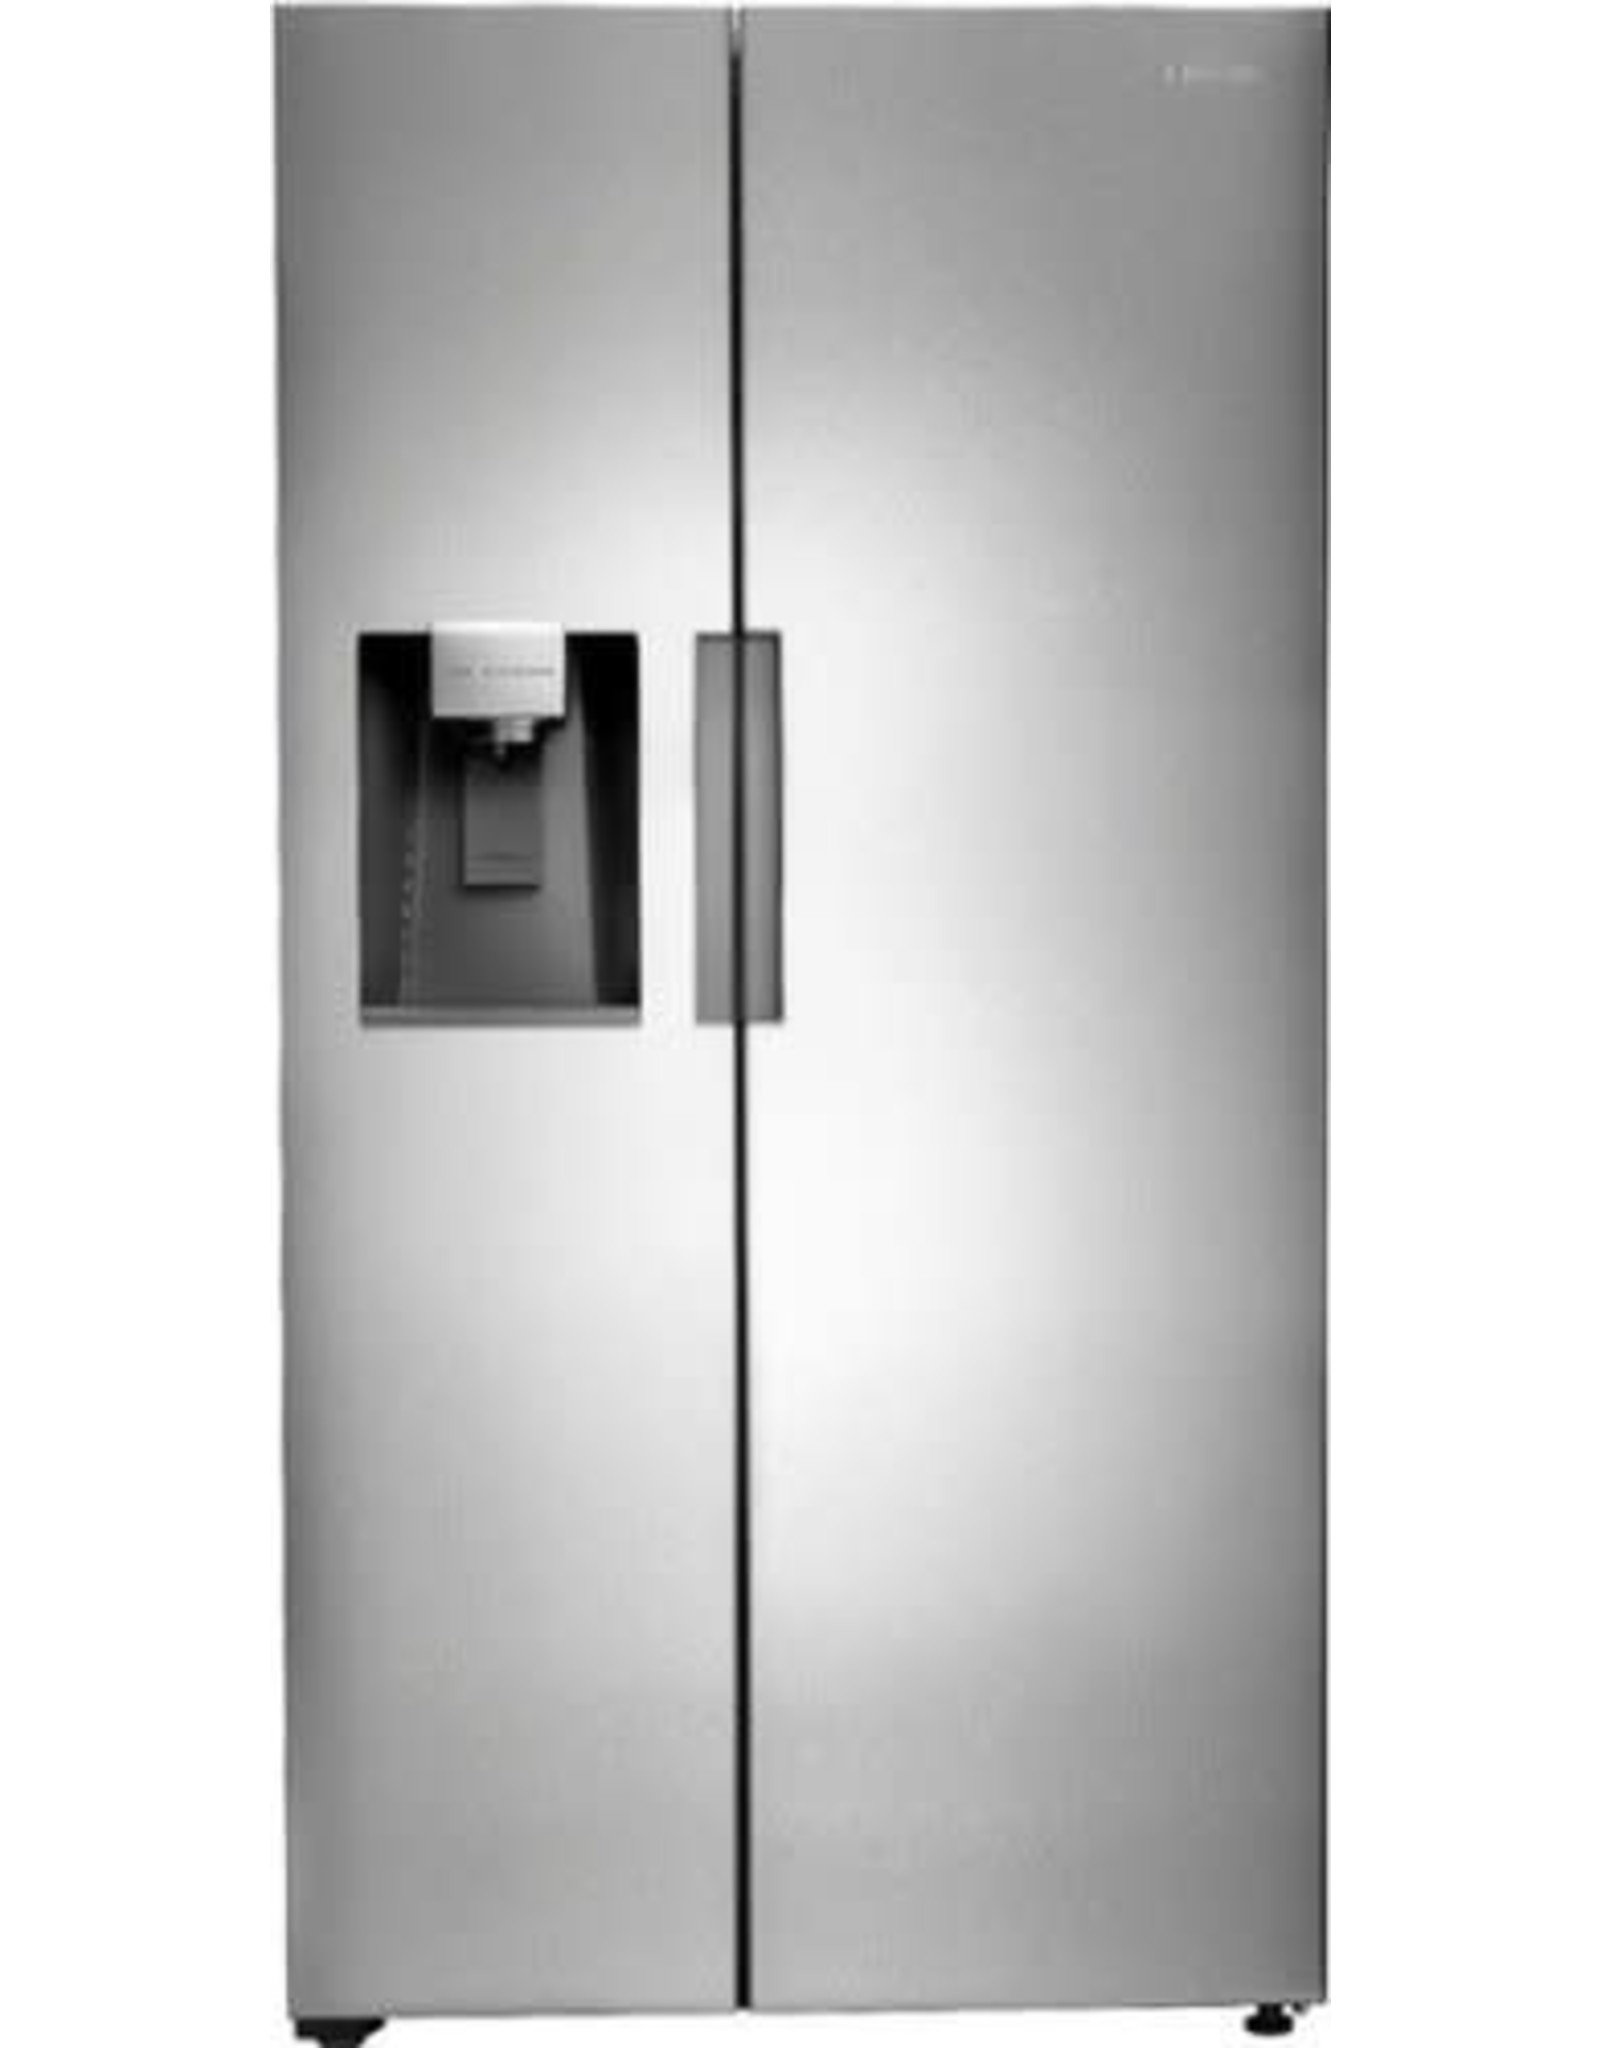 Whirlpool 24.6-cu ft Side-by-Side Refrigerator with Ice Maker (Fingerprint Resistant Stainless Steel)